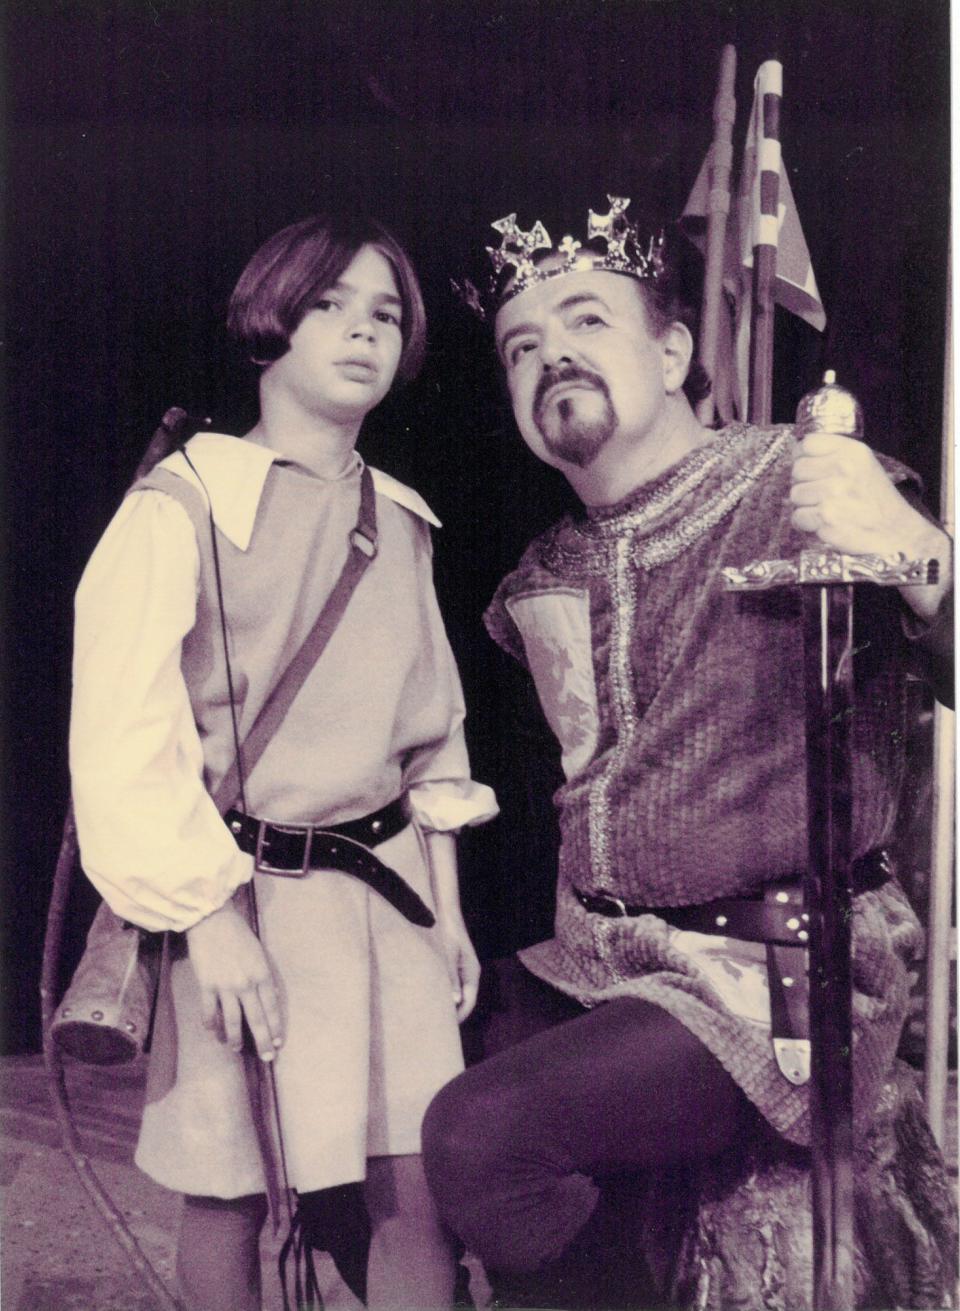 In 1998 David Holloway plays Tom of Warwick alongside Tod Booth as King Arthur in the Alhambra's production of "Camelot."